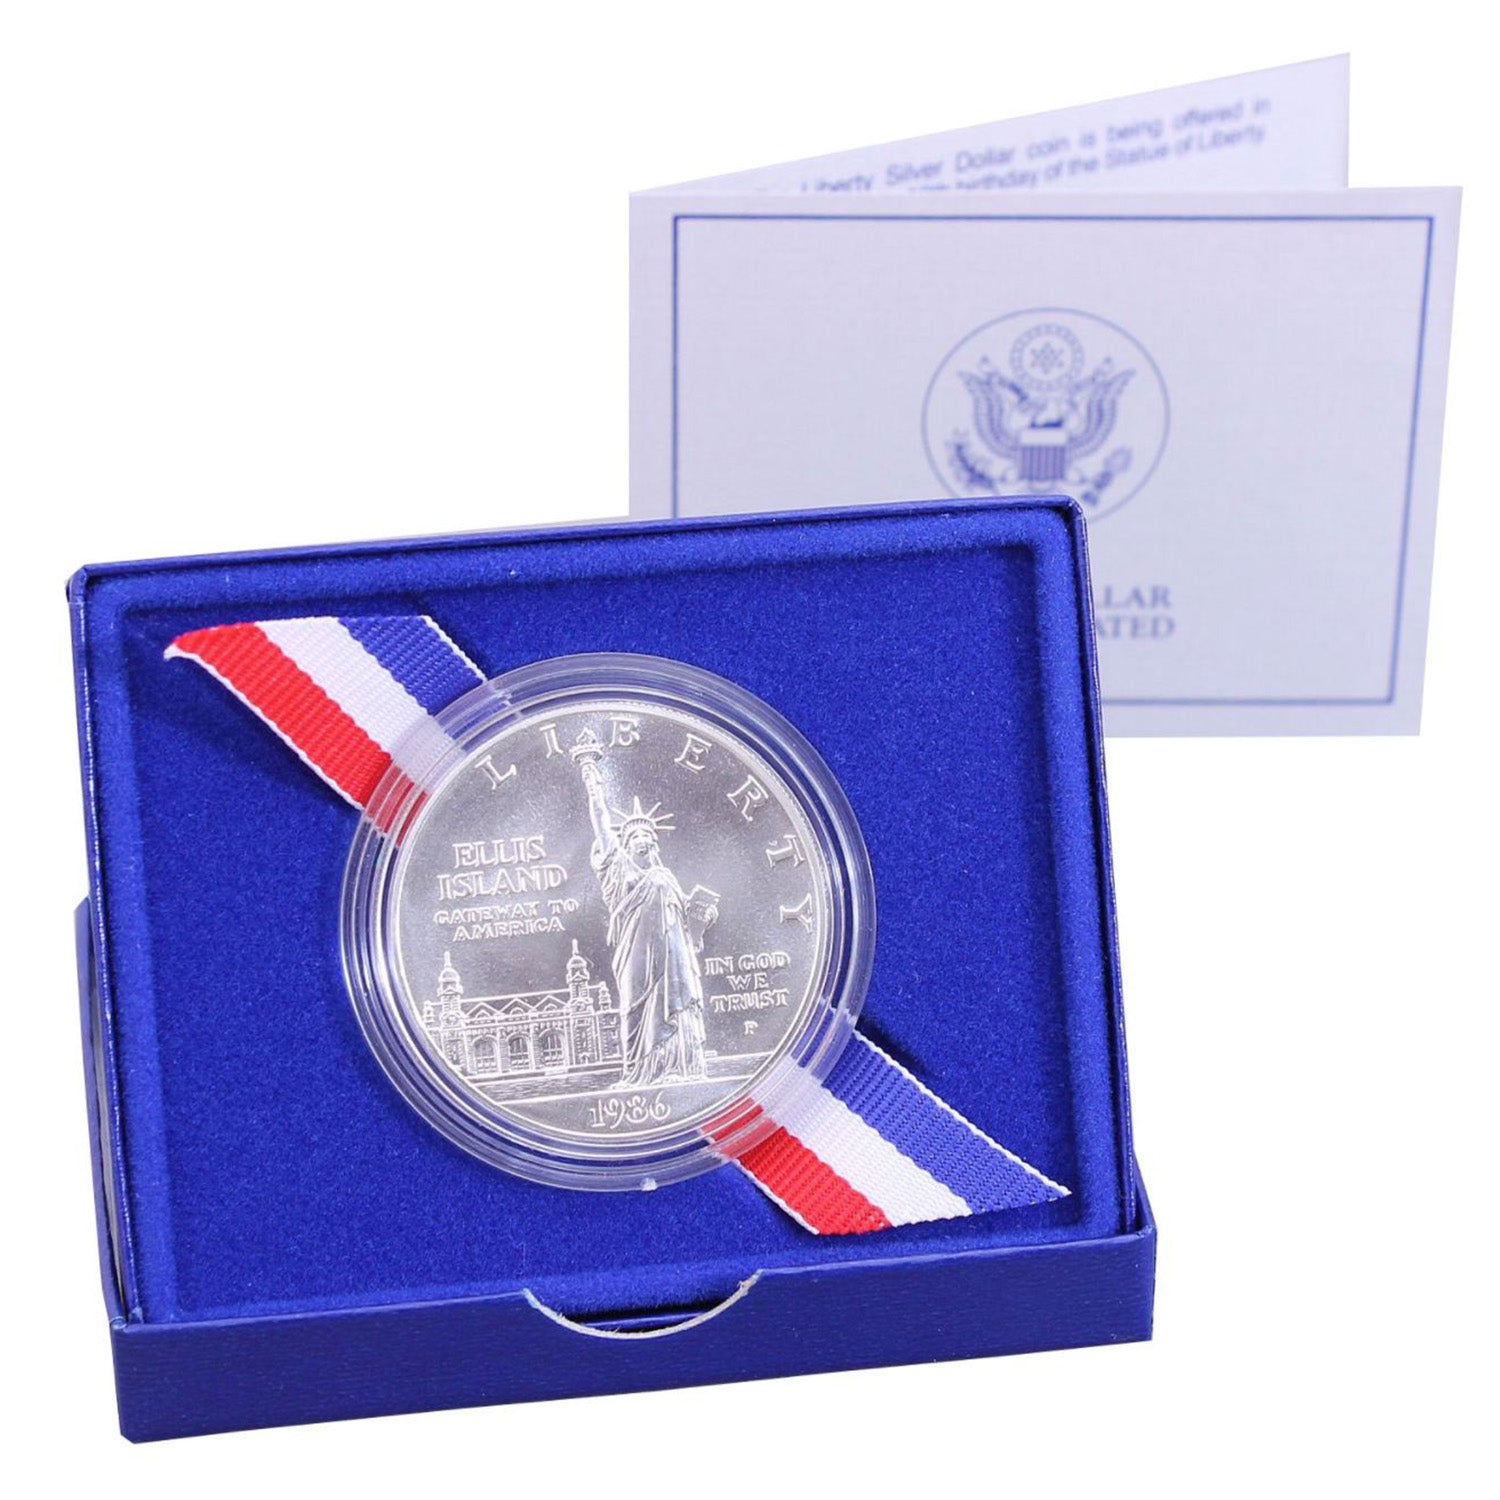 1986-P Statue of Liberty Commemorative Silver Dollar Mint State